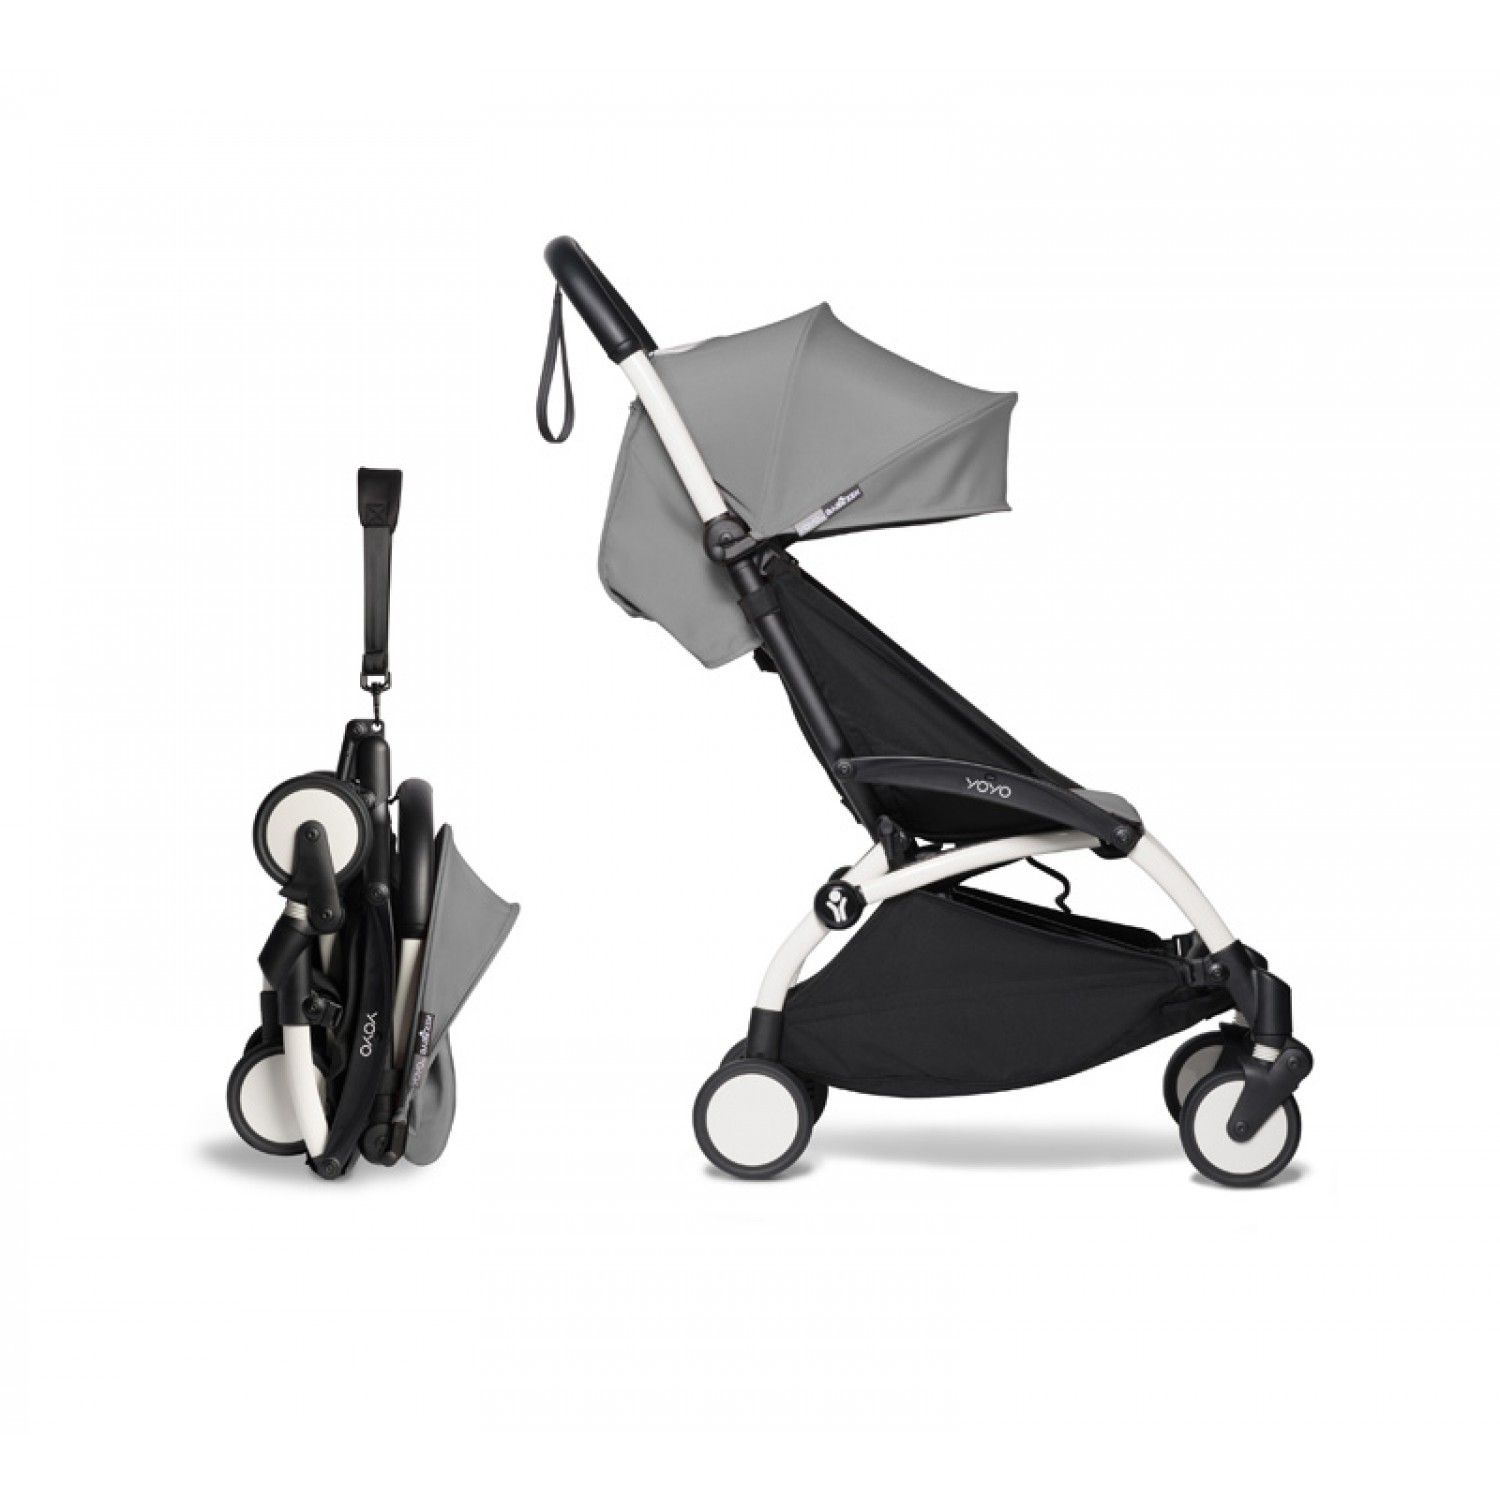 Complete BABYZEN stroller YOYO2  0+ and 6+ | White Chassis Grey